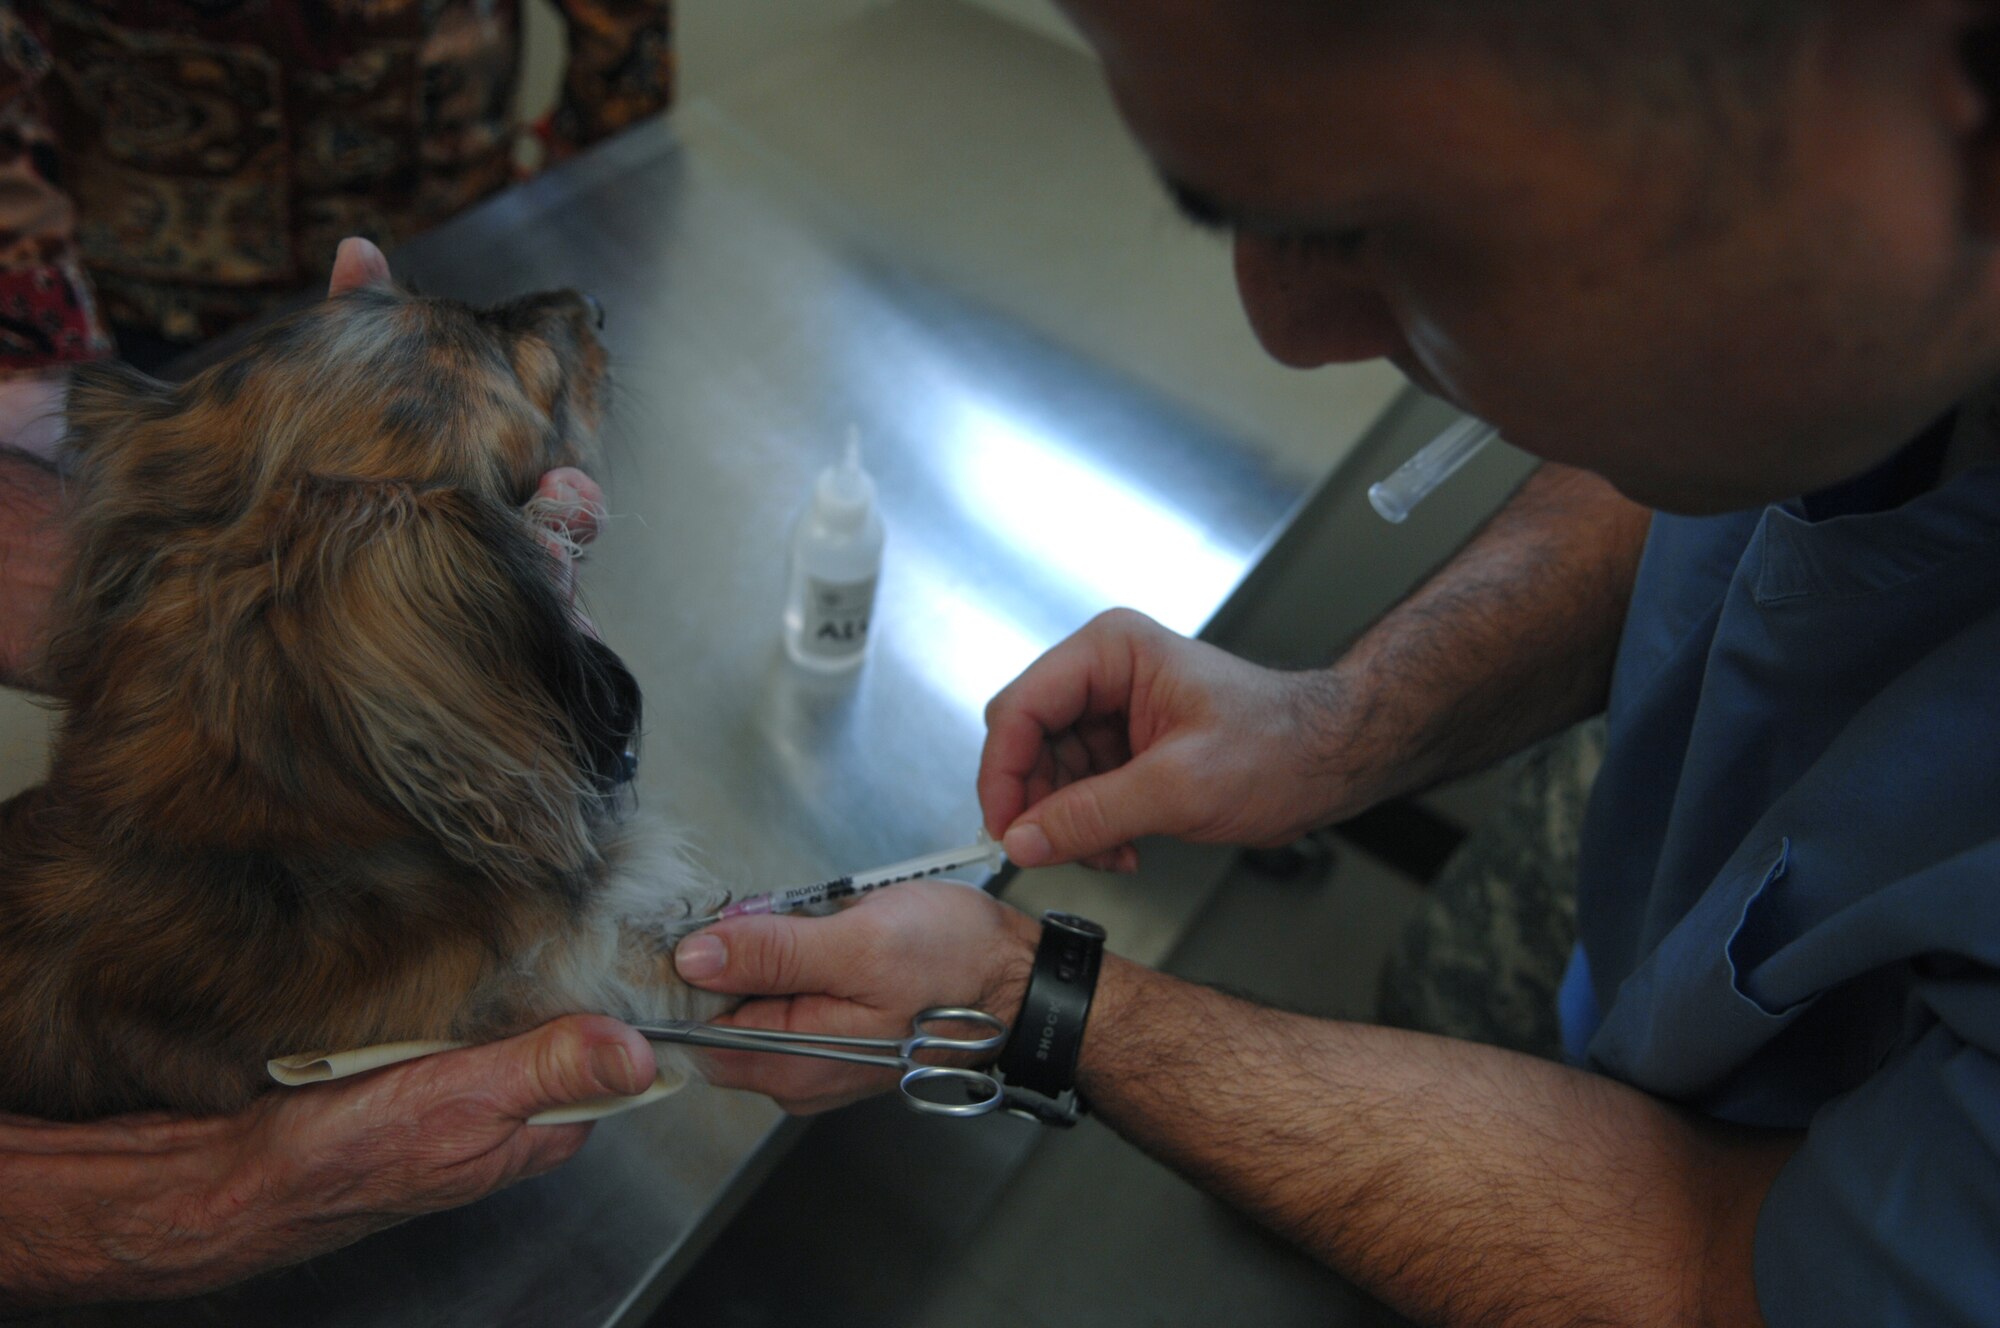 Staff Sgt. Eduardo Quezada, Army veterinarian technician, draws blood from Harley here Nov. 10. Harley is the family pet of retired Air Force member Glenn and Lavern Fry.  Sergeant Quezada tests the blood sample to for heart worms.  The clinic aids service members in keeping pets legal, safe and healthy.  (U.S. Air Force Photo/ Senior Airman Jessica Mae Snow) (Released)